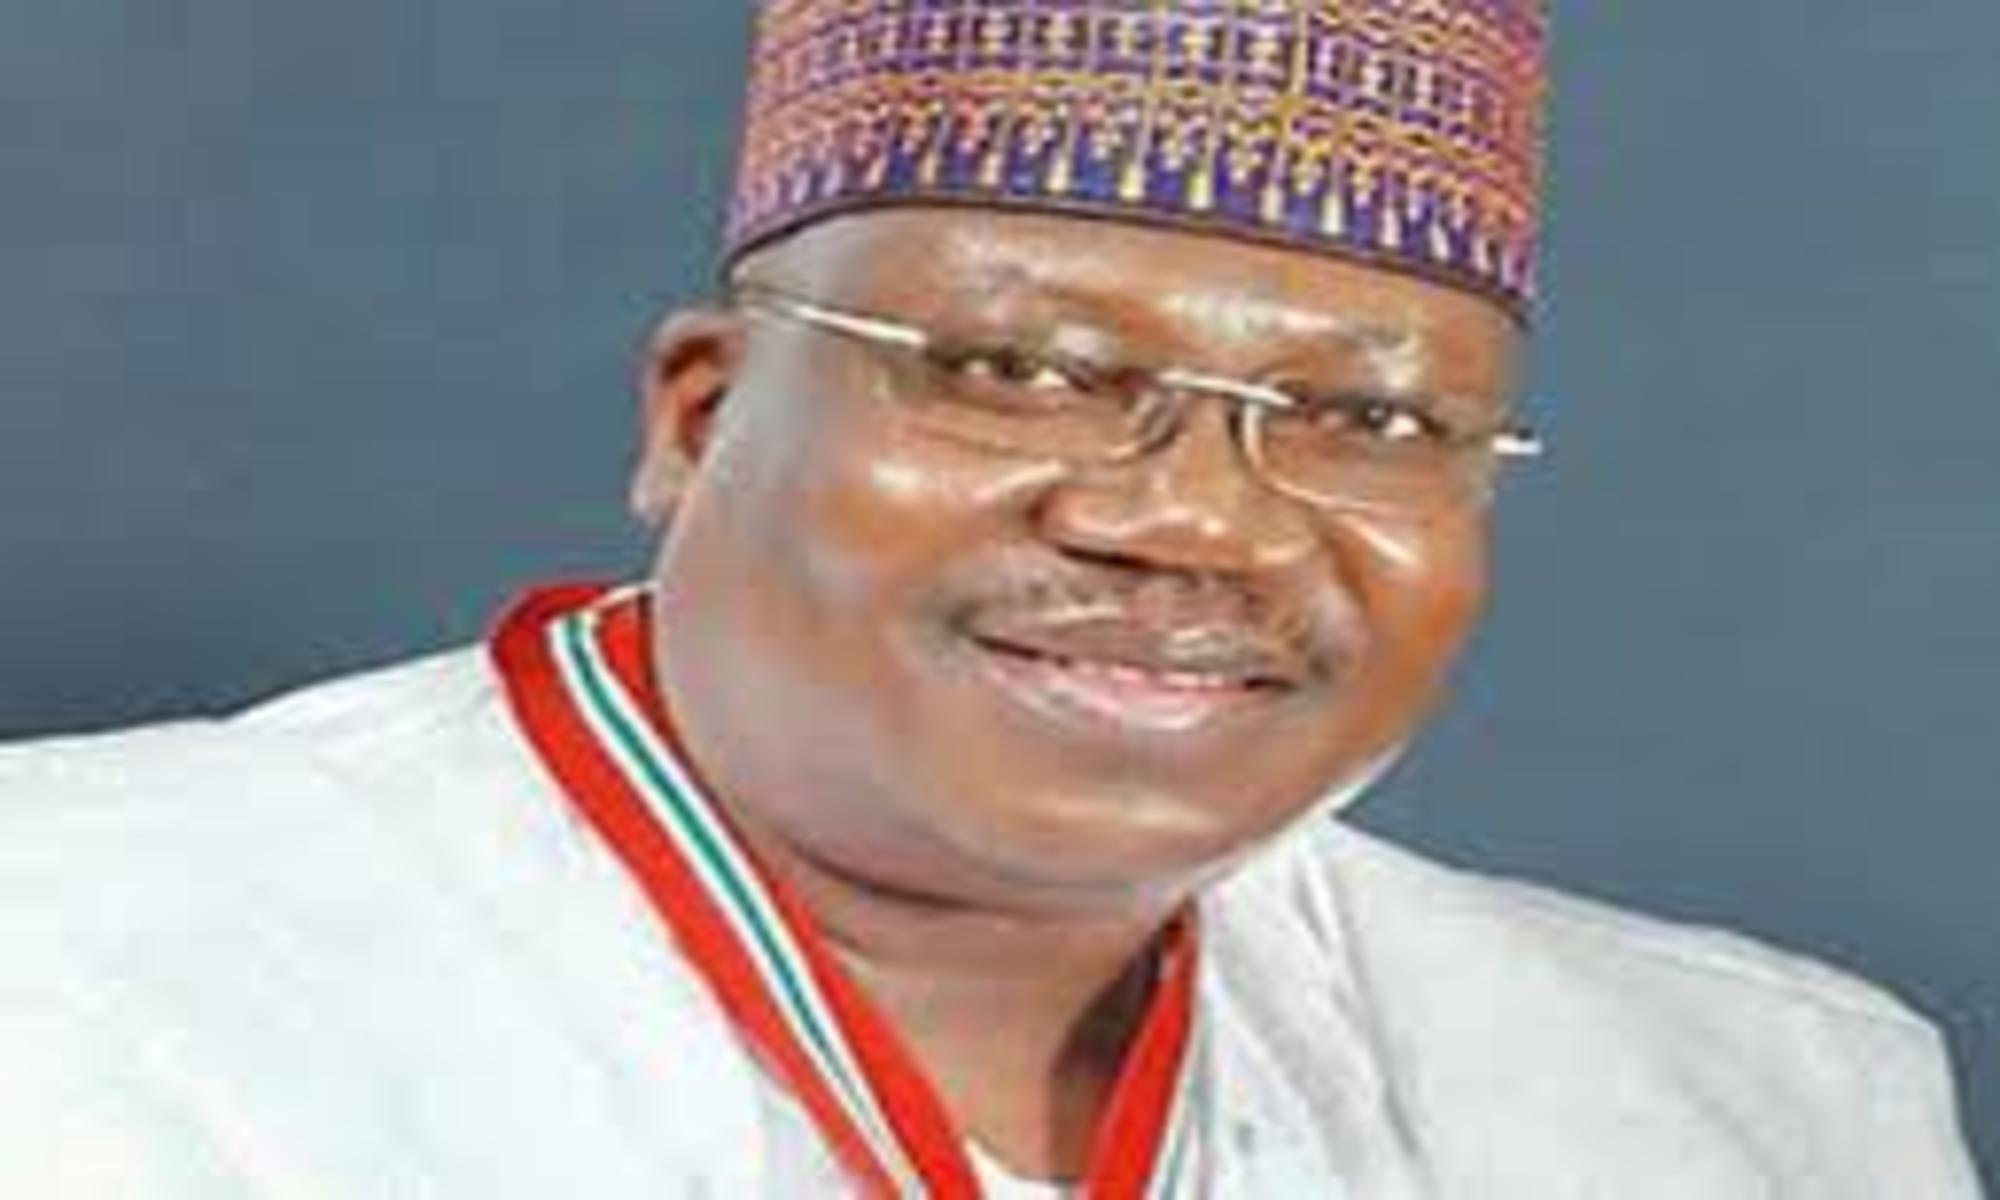 The President of the Senate, Ahmad Lawan has appealed to Nigerian leaders not to ignore concerns by any part of the country decrying the marginalisation of its peoples.